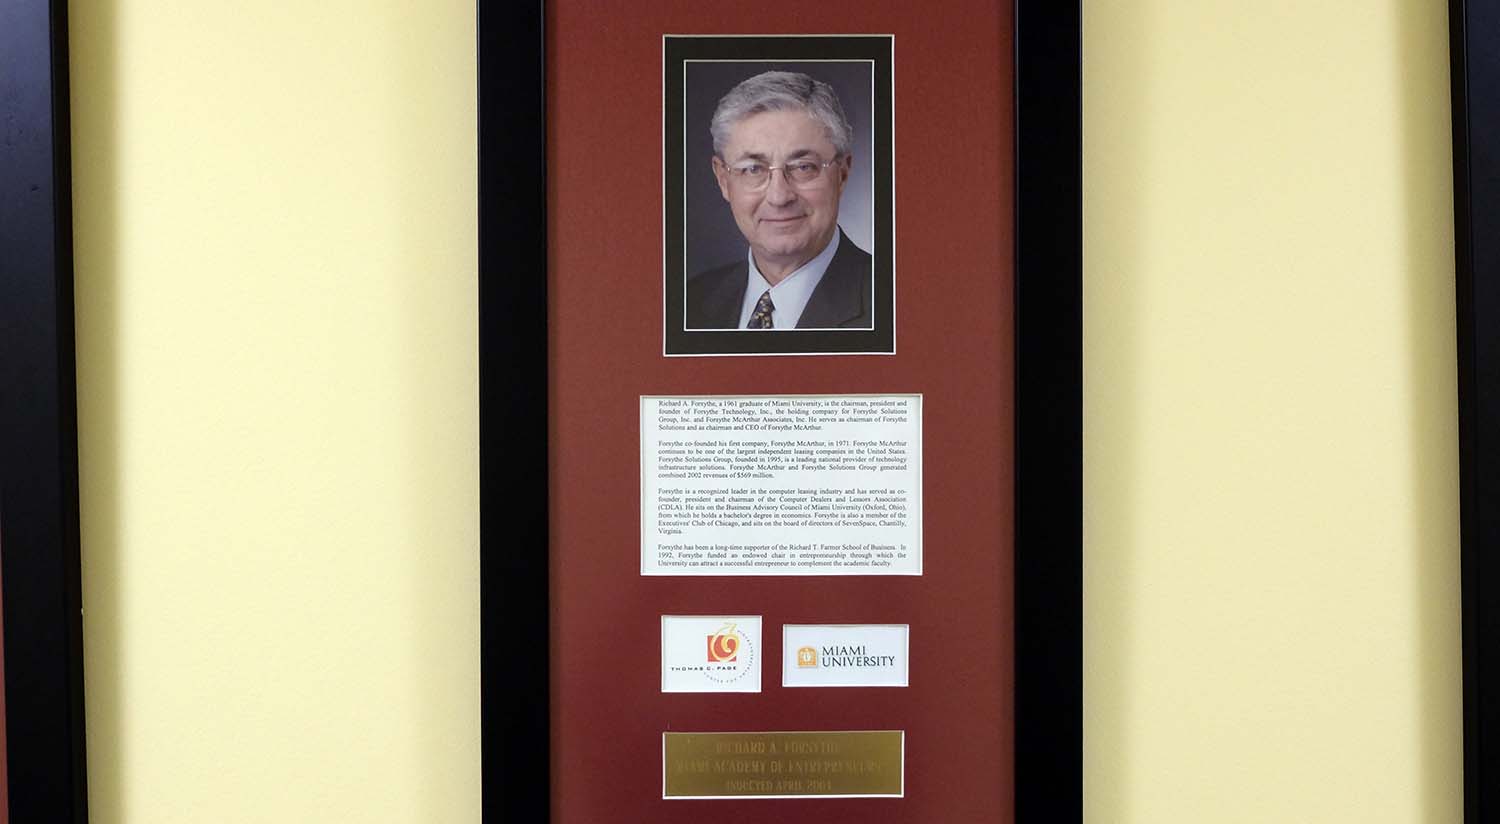 Richard Forsythe plaque in the Academy of Entrepreneurs wall